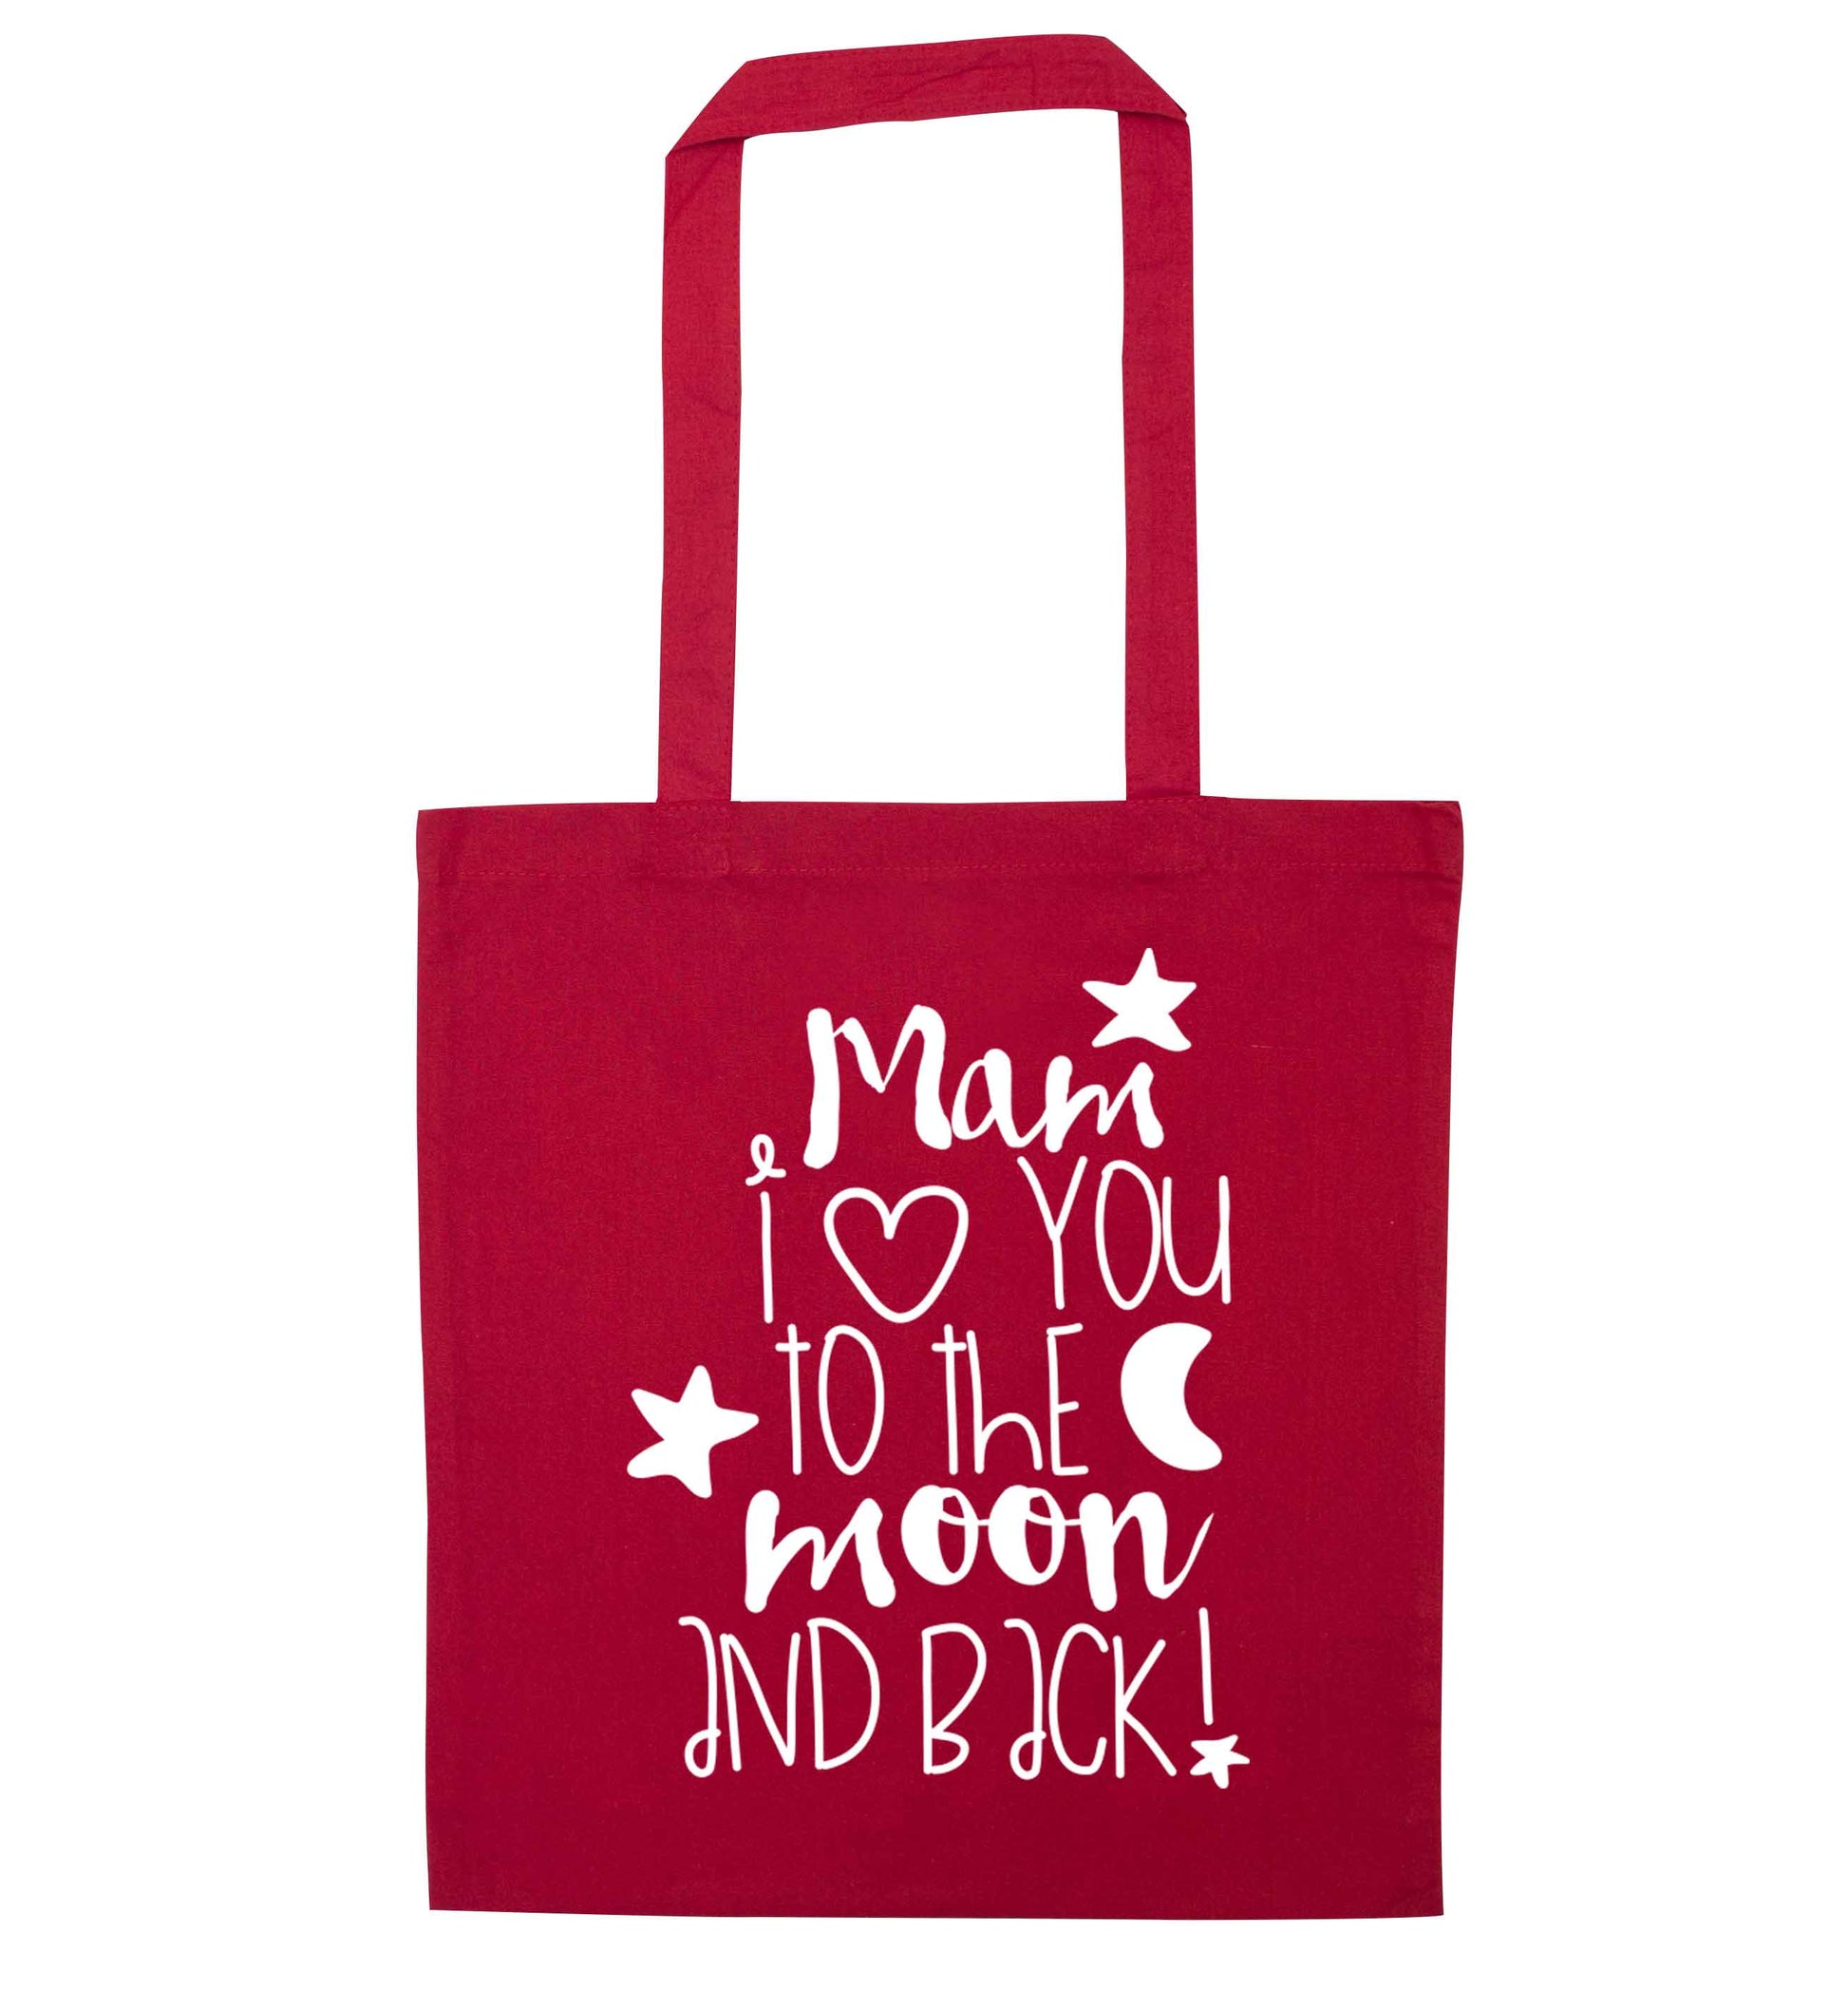 Mam I love you to the moon and back red tote bag